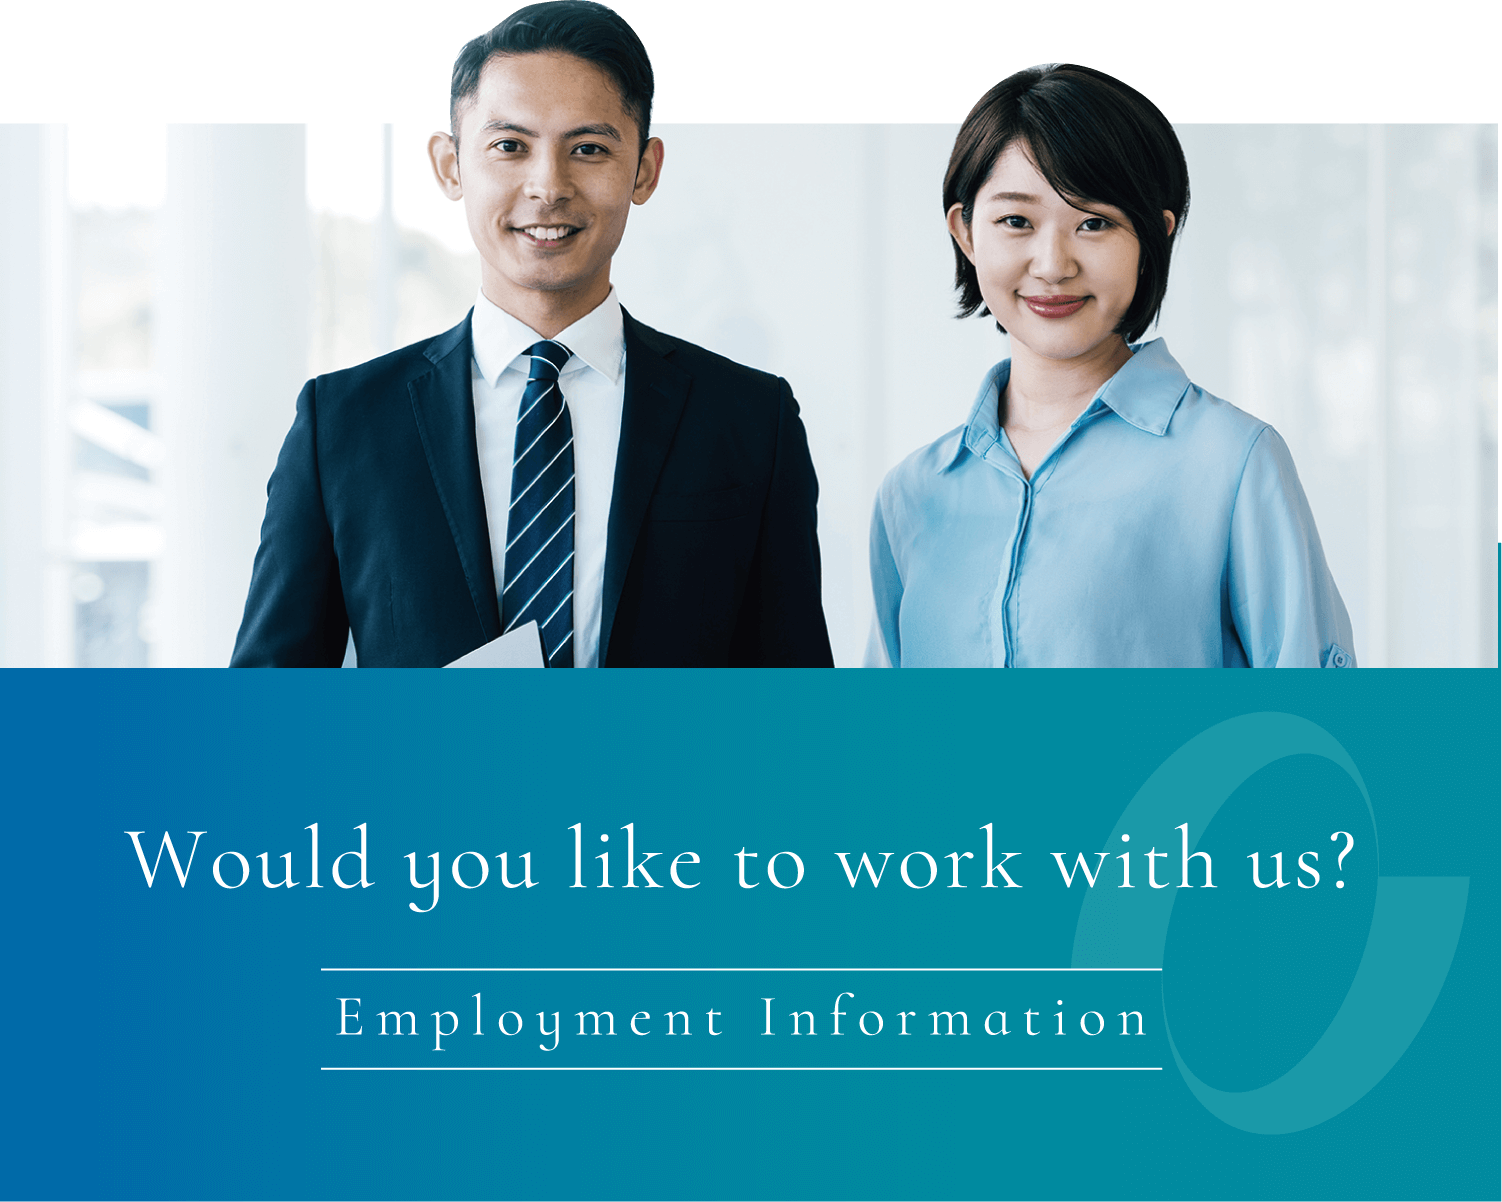 Would you like to work with us?